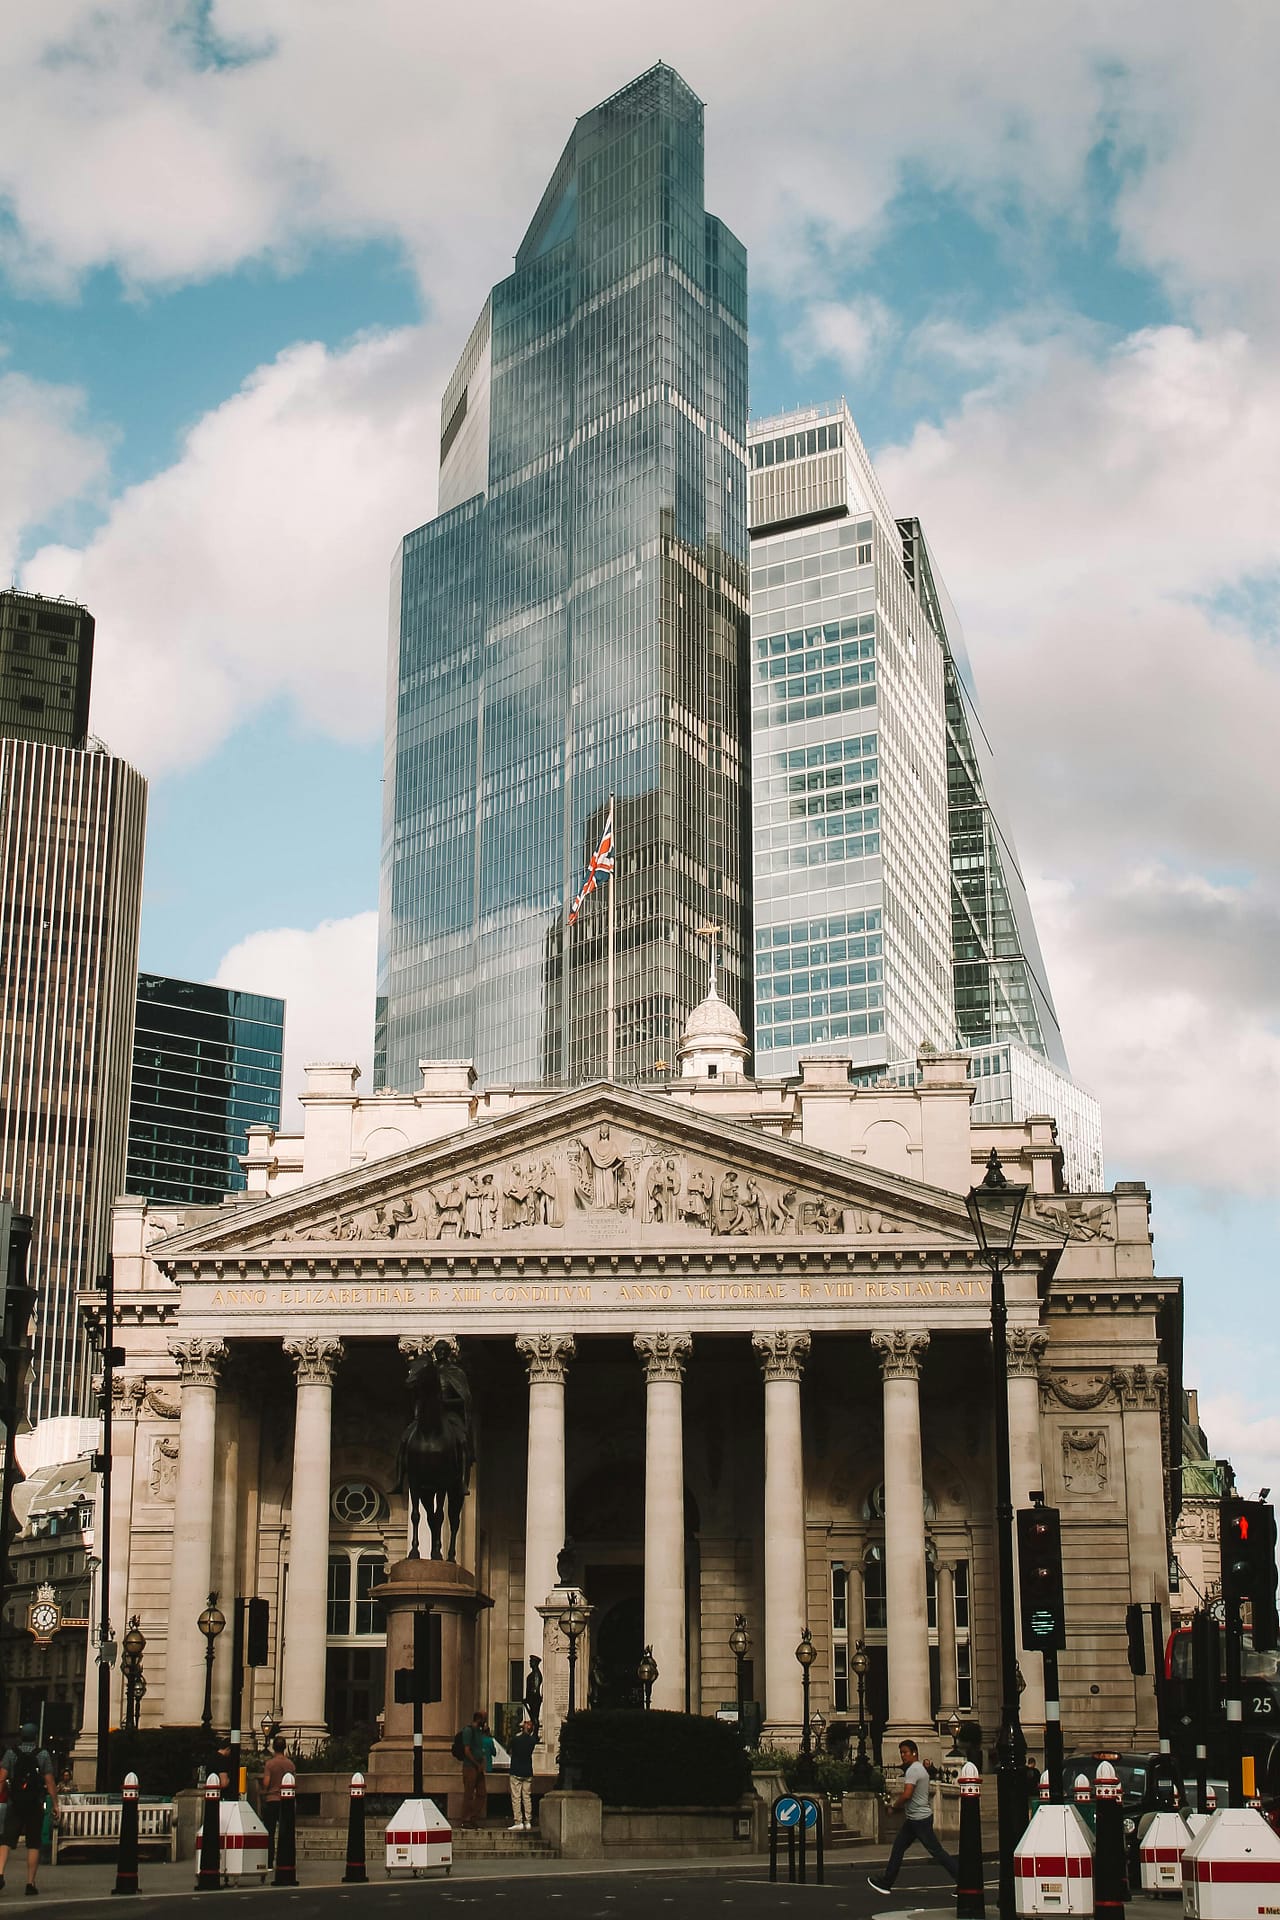 The Bank of England where the Monetary Policy sit to set UK interest rates which affects mortgage rates and loan interest rates.